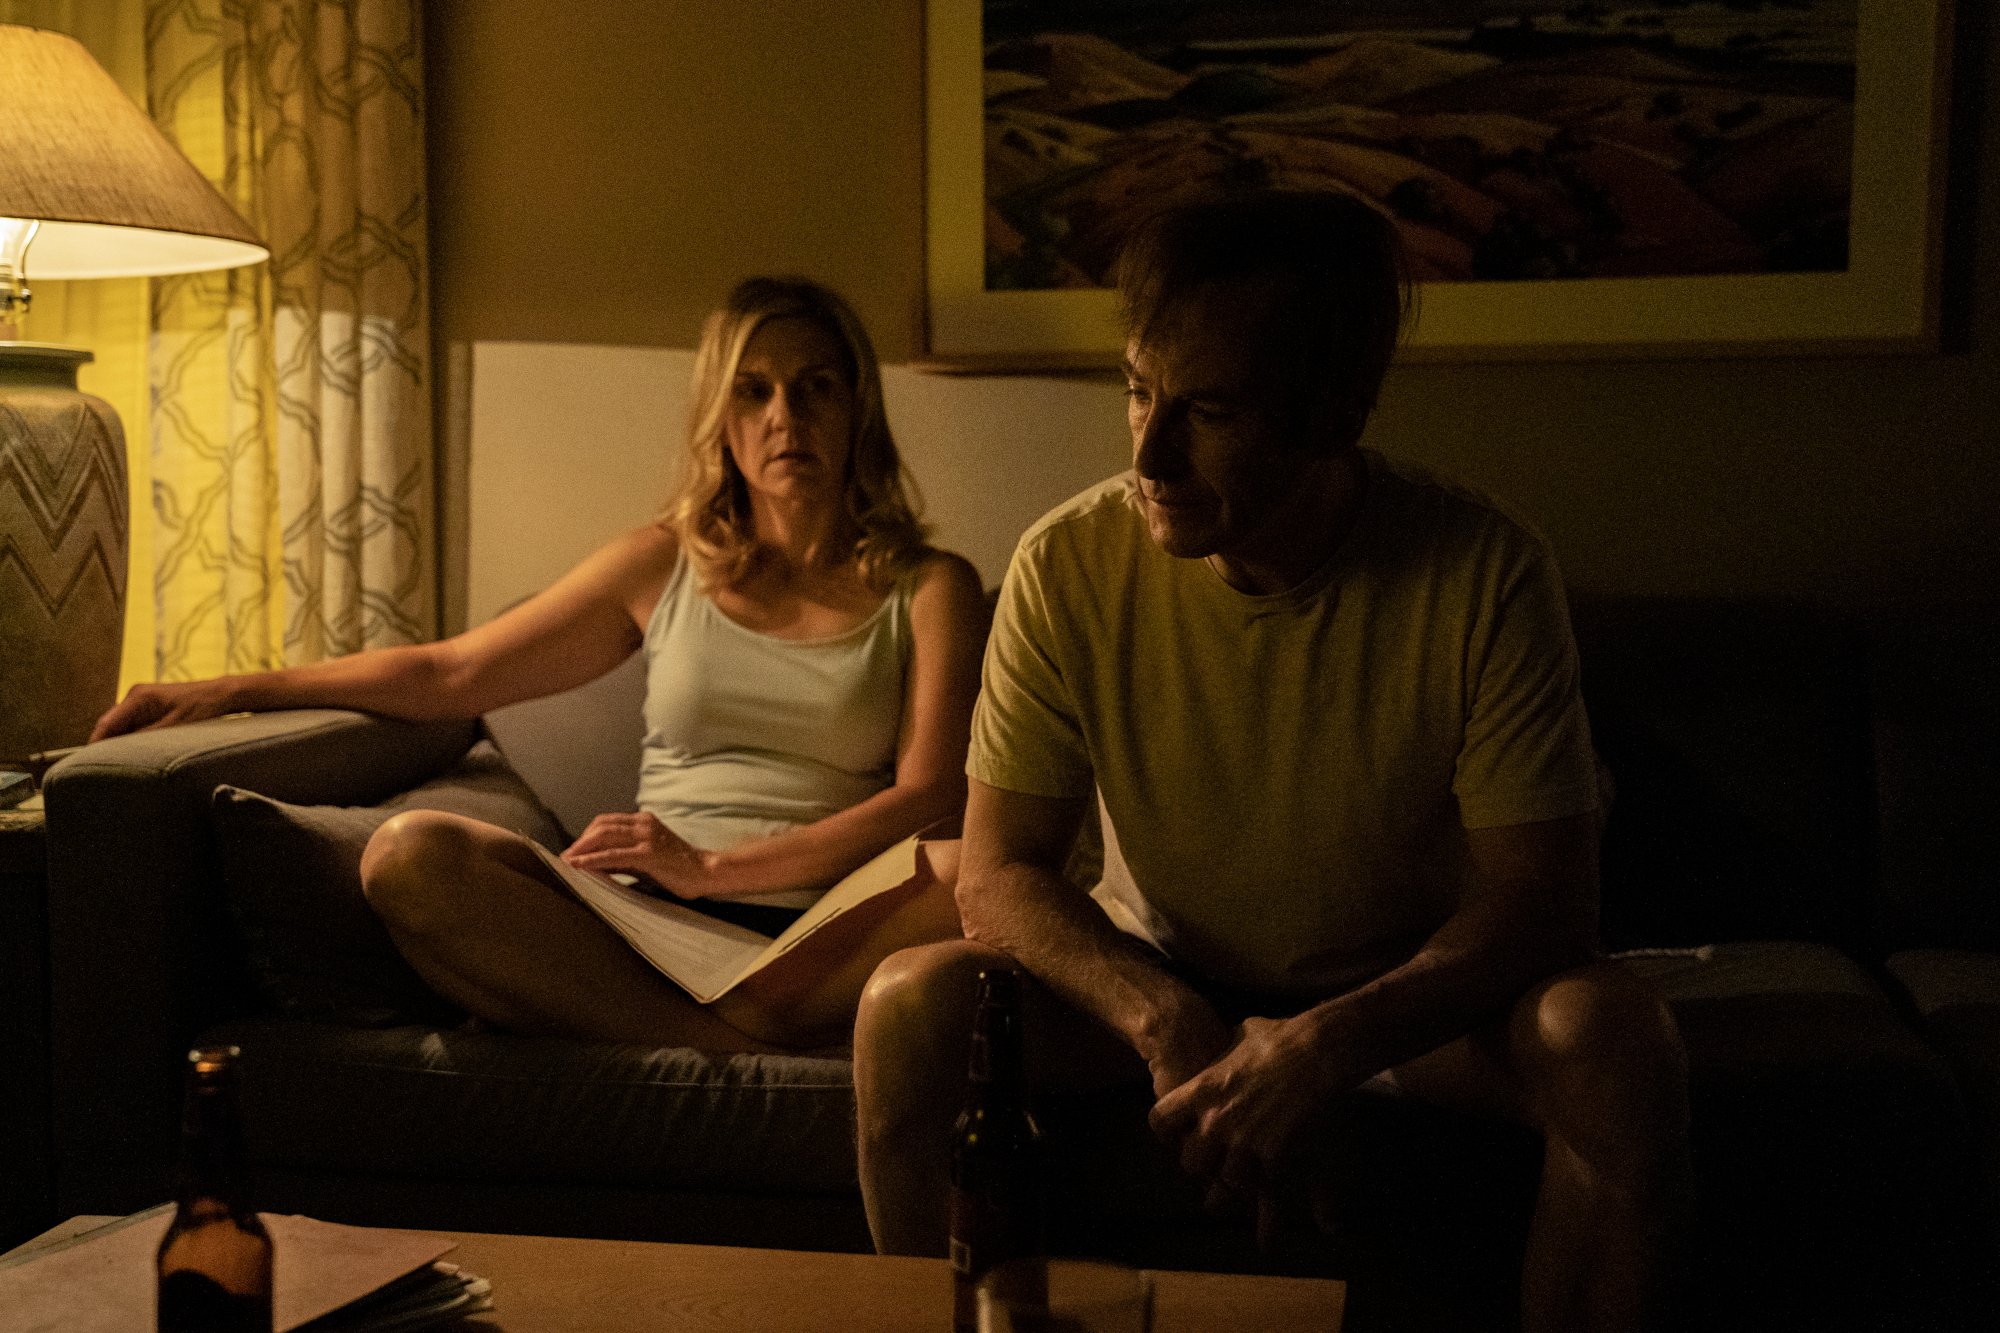 Rhea Seehorn and Bob Odenkirk as Kim Wexler and Jimmy McGill in 'Better Call Saul' Season 6 Episode 5, 'Black and Blue.' They're sitting on the couch in their dimly lit living room. Jimmy is leaning forward, and Kim is leaning back and looking at him.